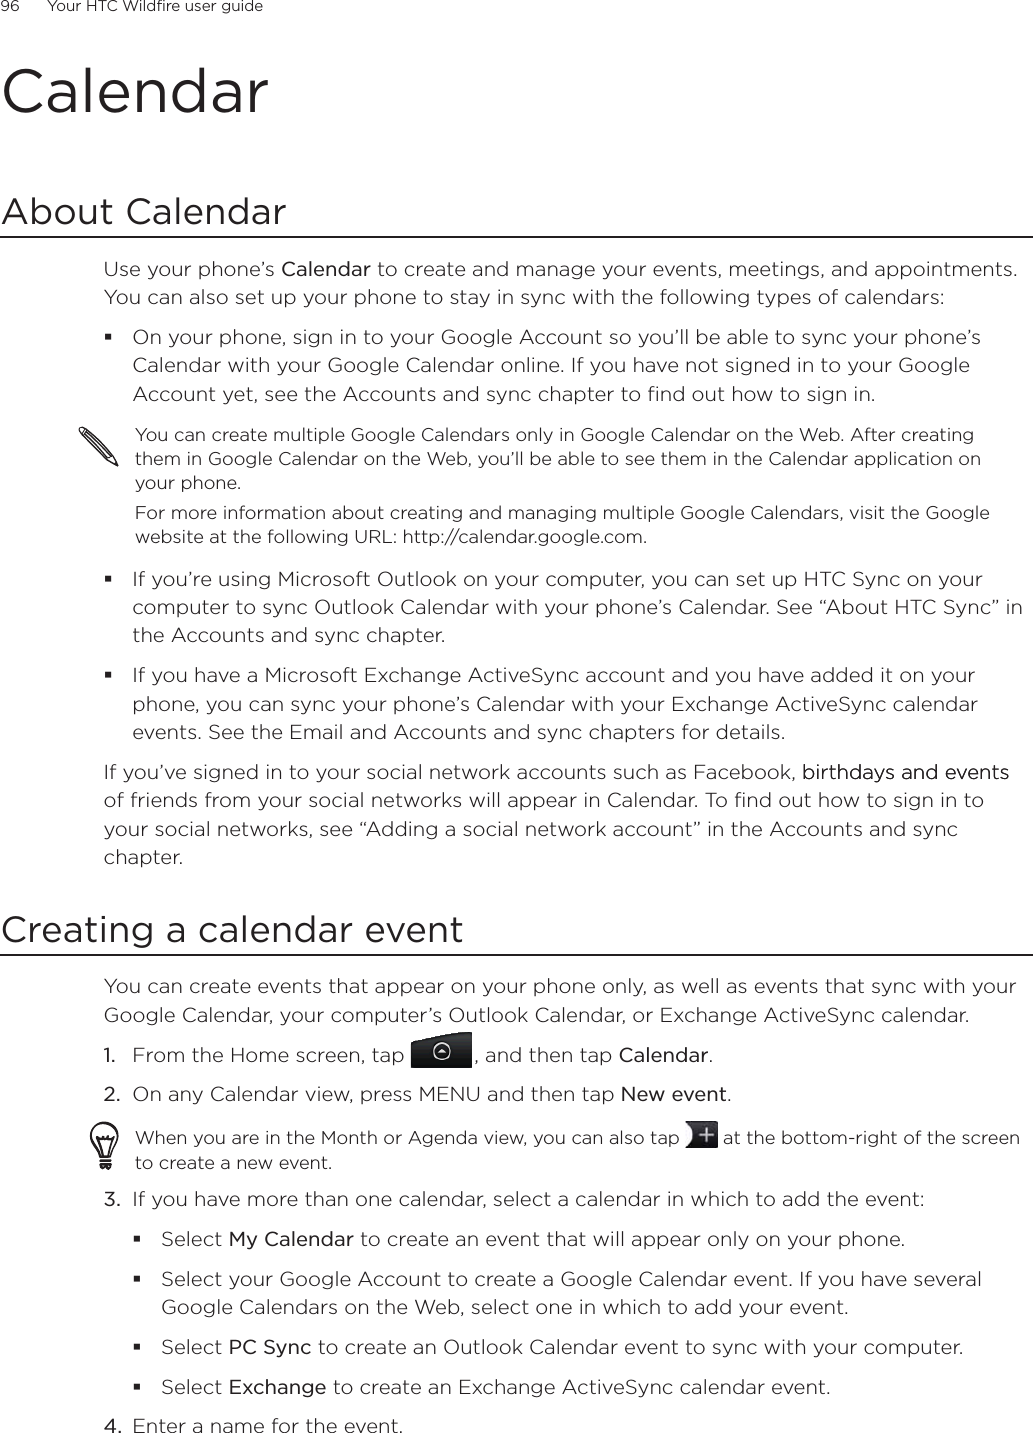 96      Your HTC Wildfire user guide      CalendarAbout CalendarUse your phone’s Calendar to create and manage your events, meetings, and appointments. You can also set up your phone to stay in sync with the following types of calendars:On your phone, sign in to your Google Account so you’ll be able to sync your phone’s Calendar with your Google Calendar online. If you have not signed in to your Google Account yet, see the Accounts and sync chapter to find out how to sign in.You can create multiple Google Calendars only in Google Calendar on the Web. After creating them in Google Calendar on the Web, you’ll be able to see them in the Calendar application on your phone.For more information about creating and managing multiple Google Calendars, visit the Google website at the following URL: http://calendar.google.com.If you’re using Microsoft Outlook on your computer, you can set up HTC Sync on your computer to sync Outlook Calendar with your phone’s Calendar. See “About HTC Sync” in the Accounts and sync chapter.If you have a Microsoft Exchange ActiveSync account and you have added it on your phone, you can sync your phone’s Calendar with your Exchange ActiveSync calendar events. See the Email and Accounts and sync chapters for details.If you’ve signed in to your social network accounts such as Facebook, birthdays and eventsbirthdays and events of friends from your social networks will appear in Calendar. To find out how to sign in to your social networks, see “Adding a social network account” in the Accounts and sync chapter.Creating a calendar eventYou can create events that appear on your phone only, as well as events that sync with your Google Calendar, your computer’s Outlook Calendar, or Exchange ActiveSync calendar.1.  From the Home screen, tap  , and then tap Calendar.2.  On any Calendar view, press MENU and then tap New event.When you are in the Month or Agenda view, you can also tap   at the bottom-right of the screen to create a new event.3.  If you have more than one calendar, select a calendar in which to add the event:Select My Calendar to create an event that will appear only on your phone.Select your Google Account to create a Google Calendar event. If you have several Google Calendars on the Web, select one in which to add your event.Select PC Sync to create an Outlook Calendar event to sync with your computer.Select Exchange to create an Exchange ActiveSync calendar event.4.  Enter a name for the event.